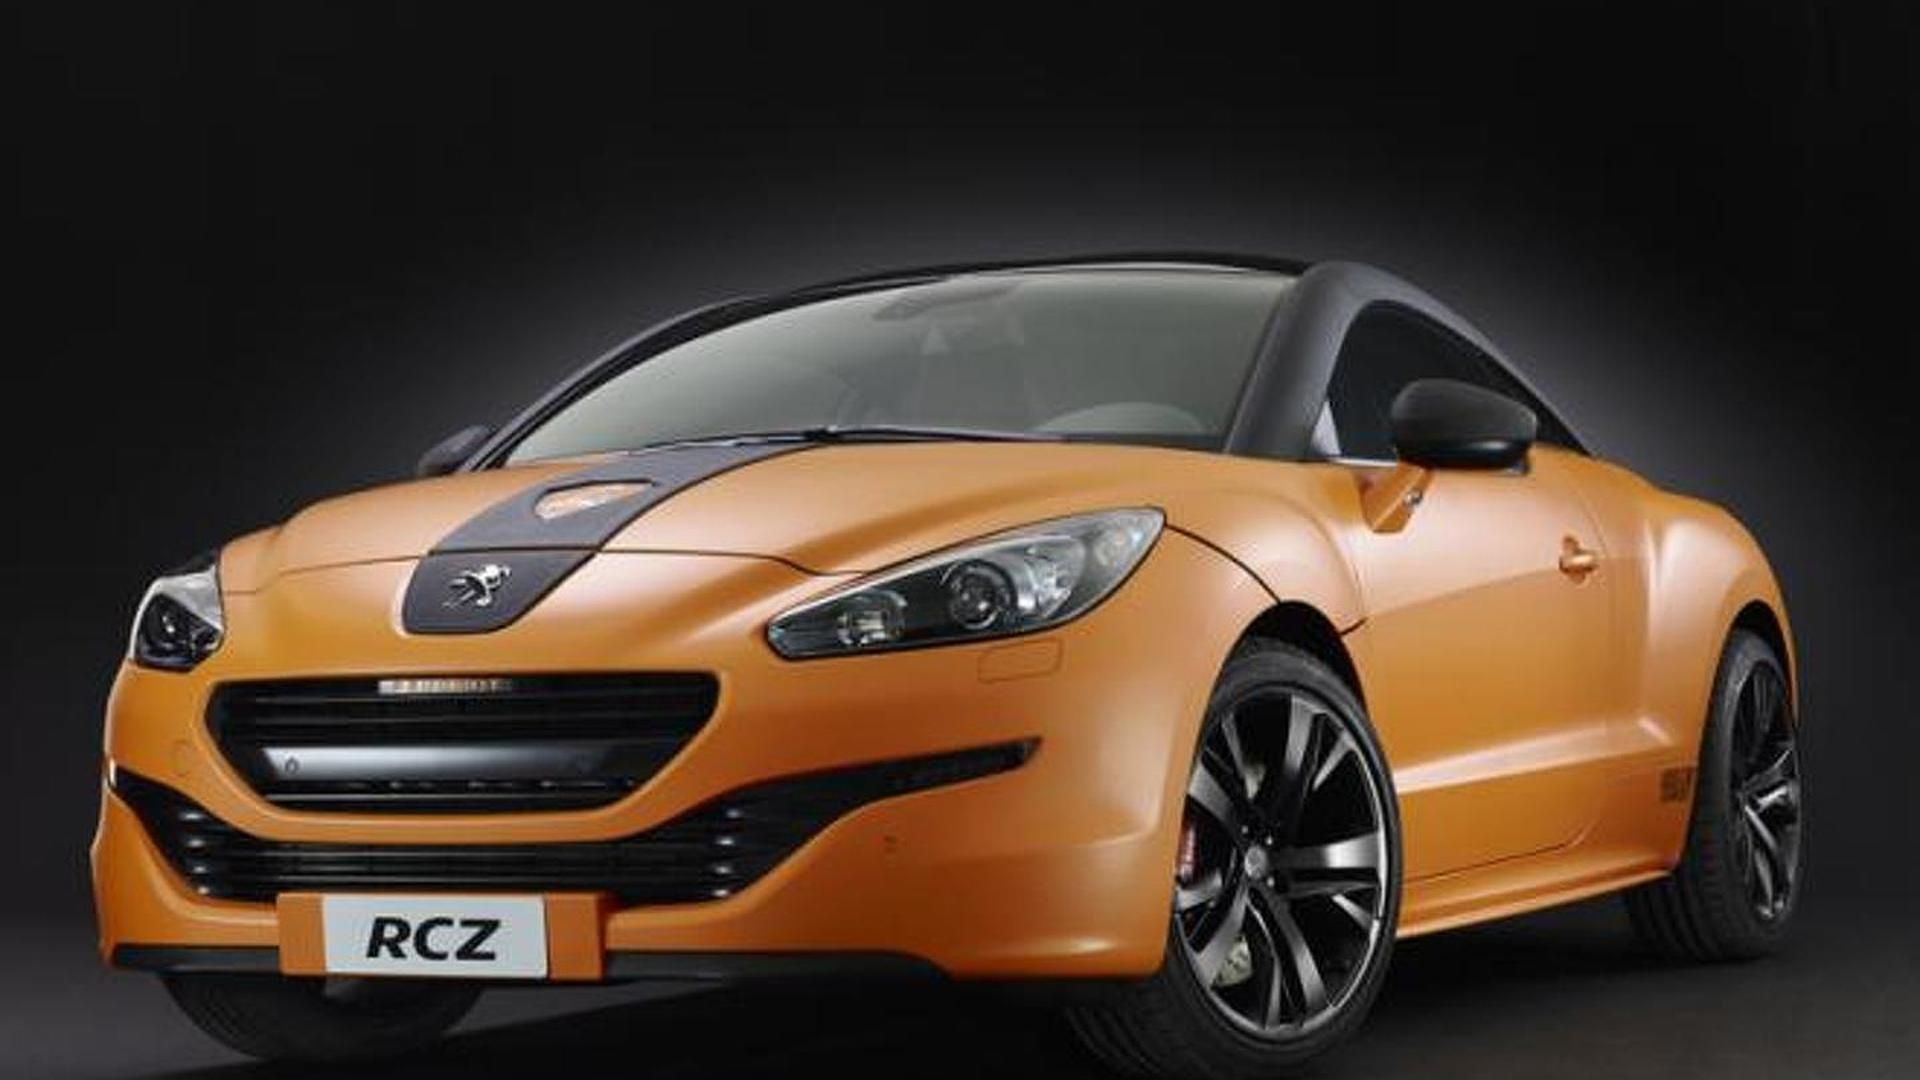 Peugeot Rcz Arlen Ness Announced With Ogier Accent Mirrors (View 12 of 12)